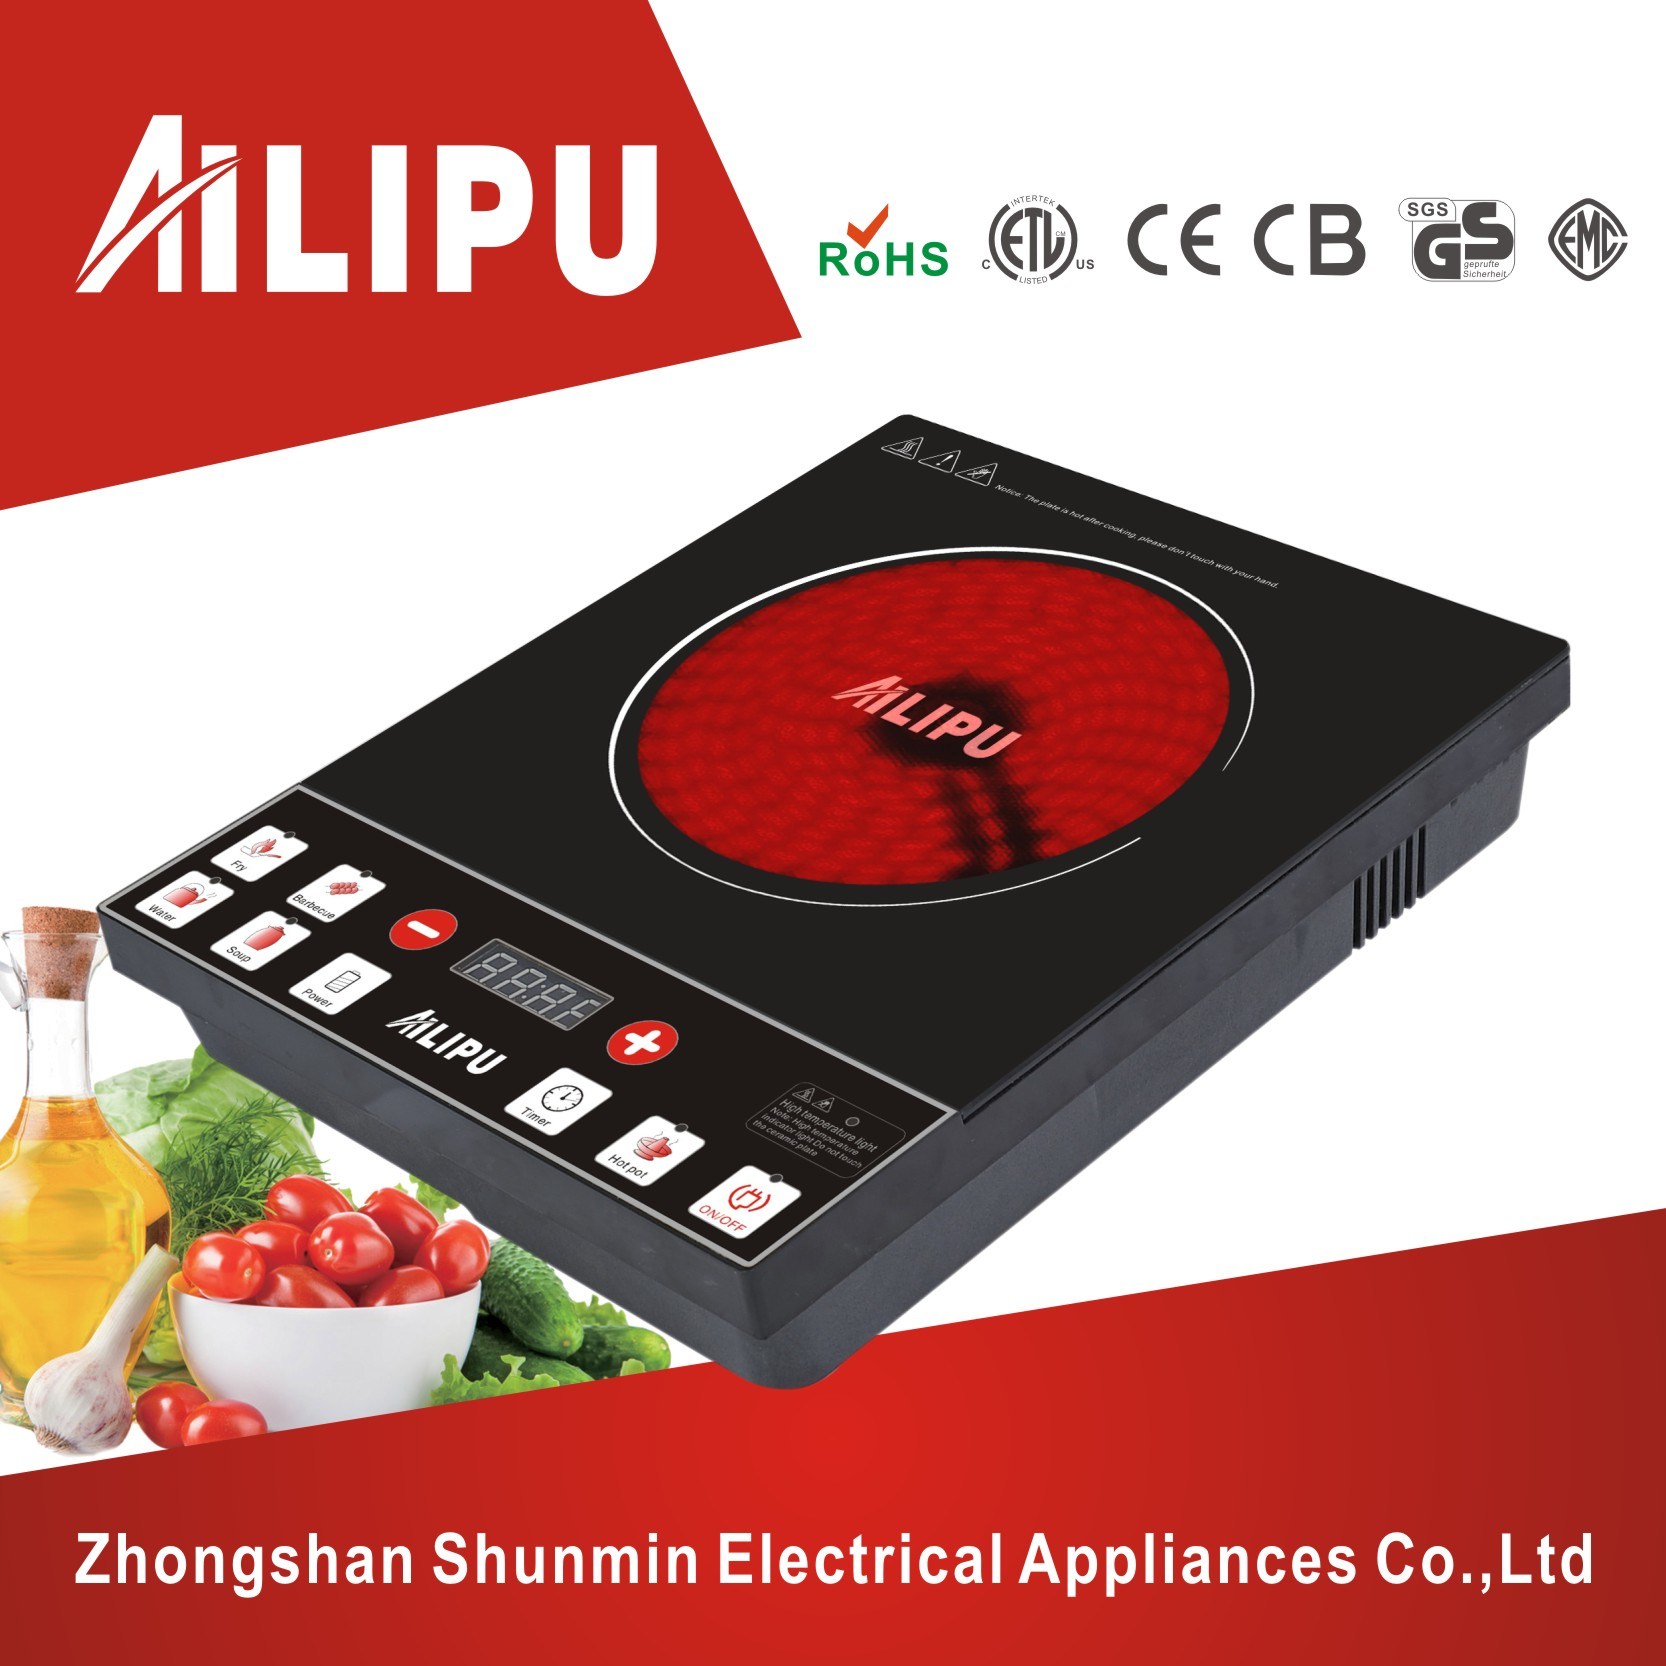 Low Price and Push Button Single Burner Infrared Ceramic Cooker Used for Any Utensil